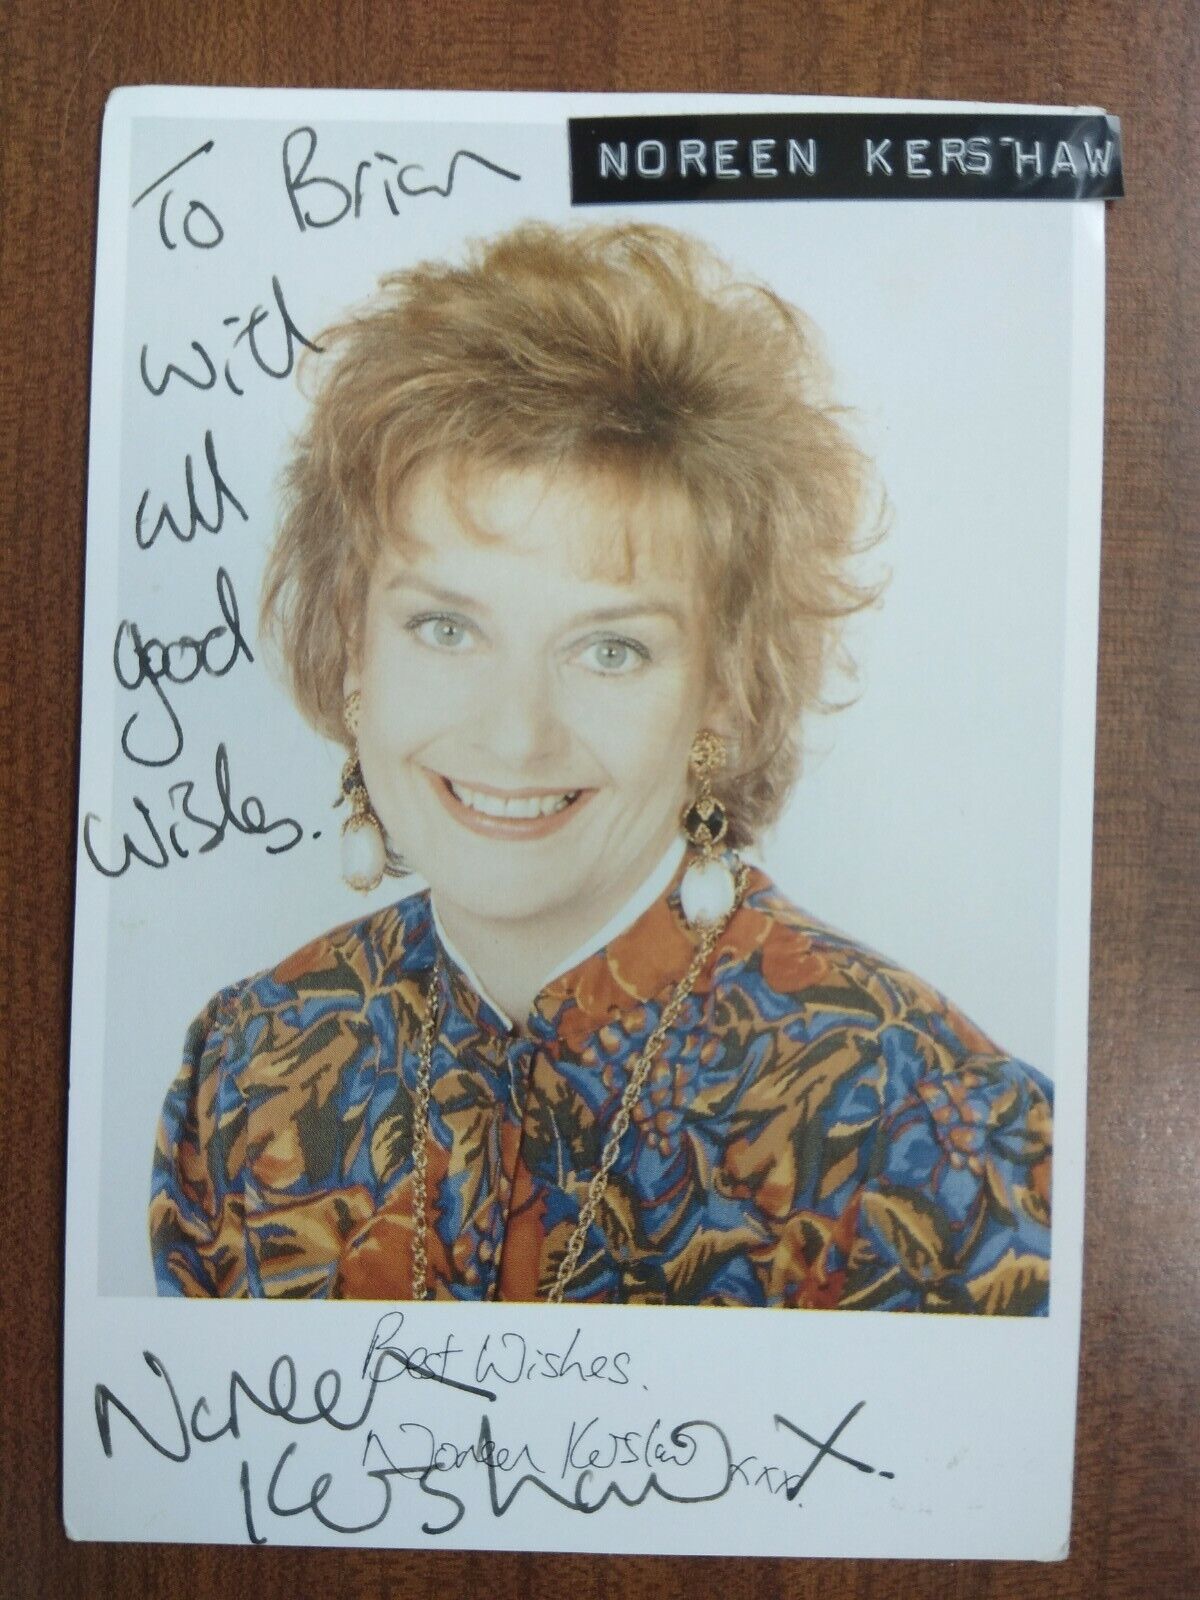 NOREEN KERSHAW *Kathy Roach* BROOKSIDE HAND SIGNED AUTOGRAPH FAN CAST PHOTO CARD